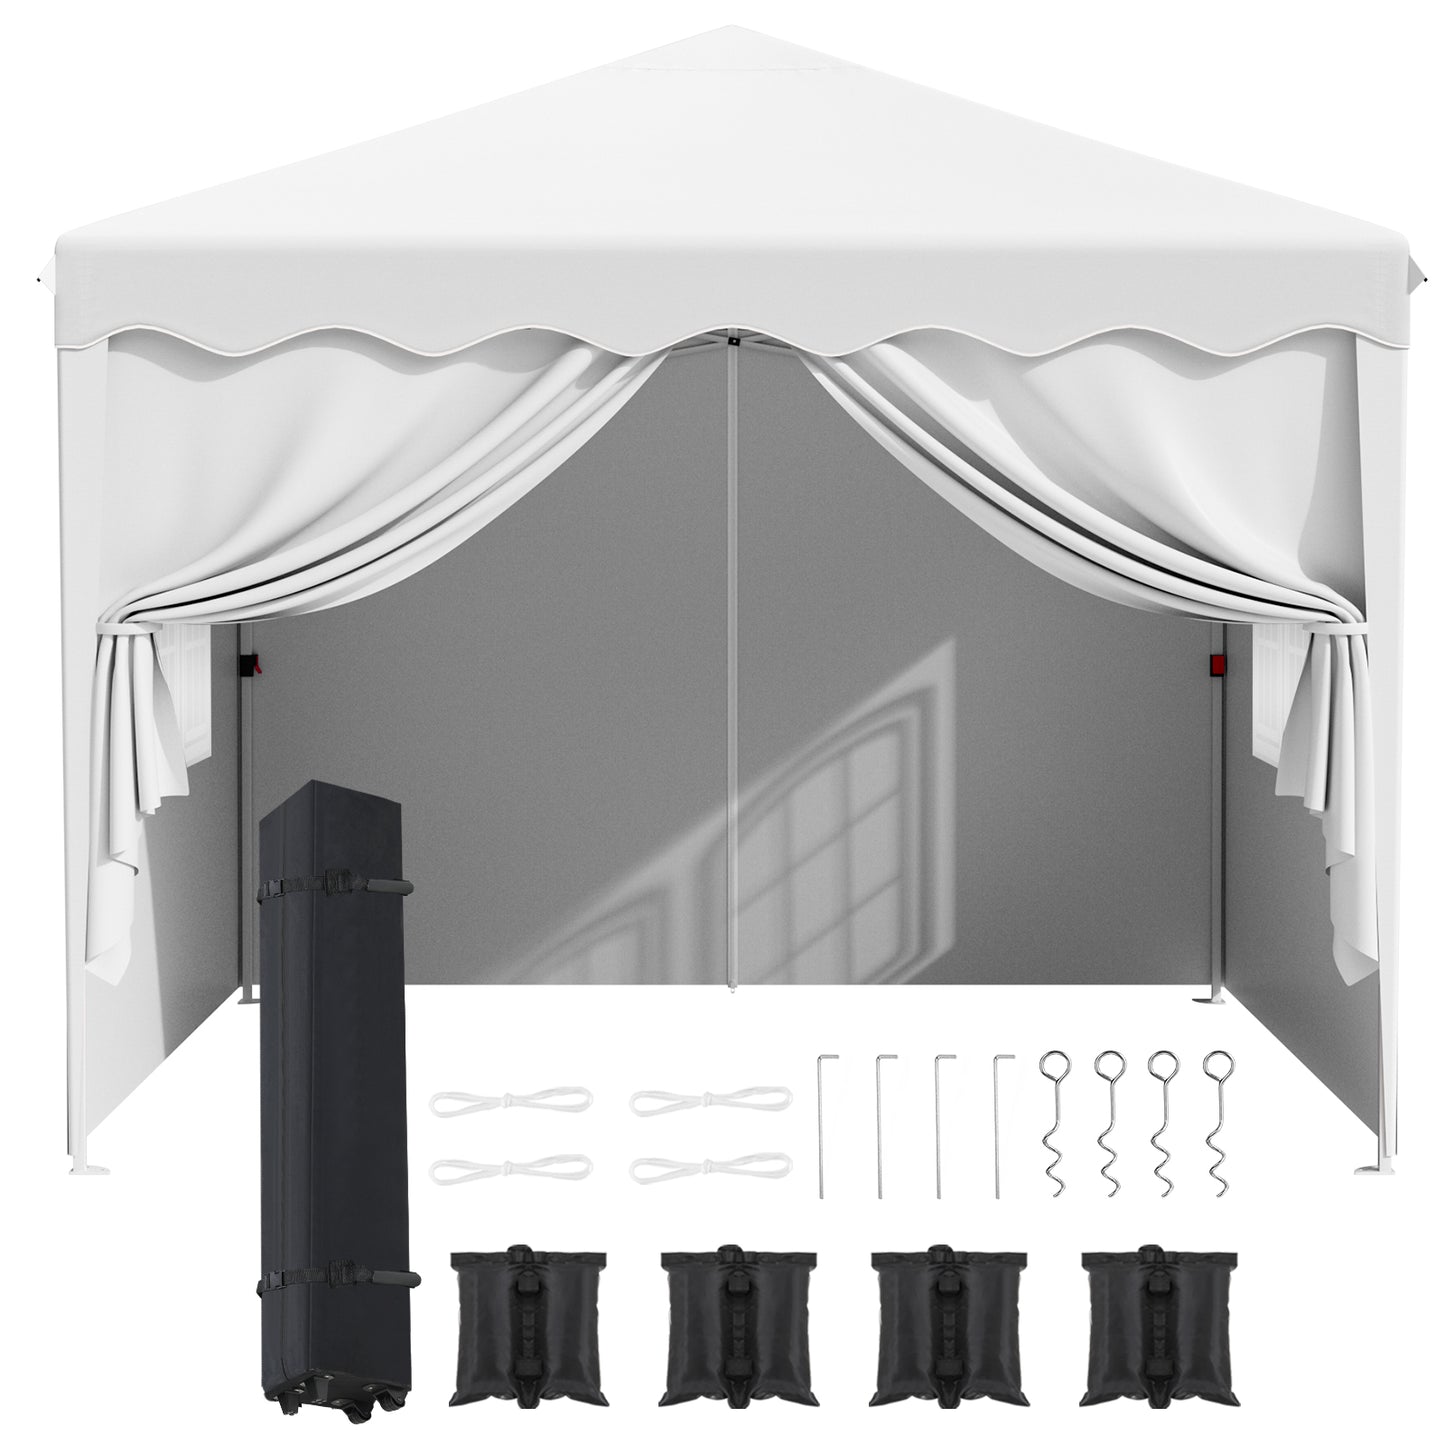 Arlopu 10x10FT Pop Up Canopy Tent with 4 Sidewalls, Commercial -Series Instant Canopy Tent, Outdoor Portable Gazebo with Wheeled Bag, Party Canopies Event Tent for Wedding/Patio/Camping